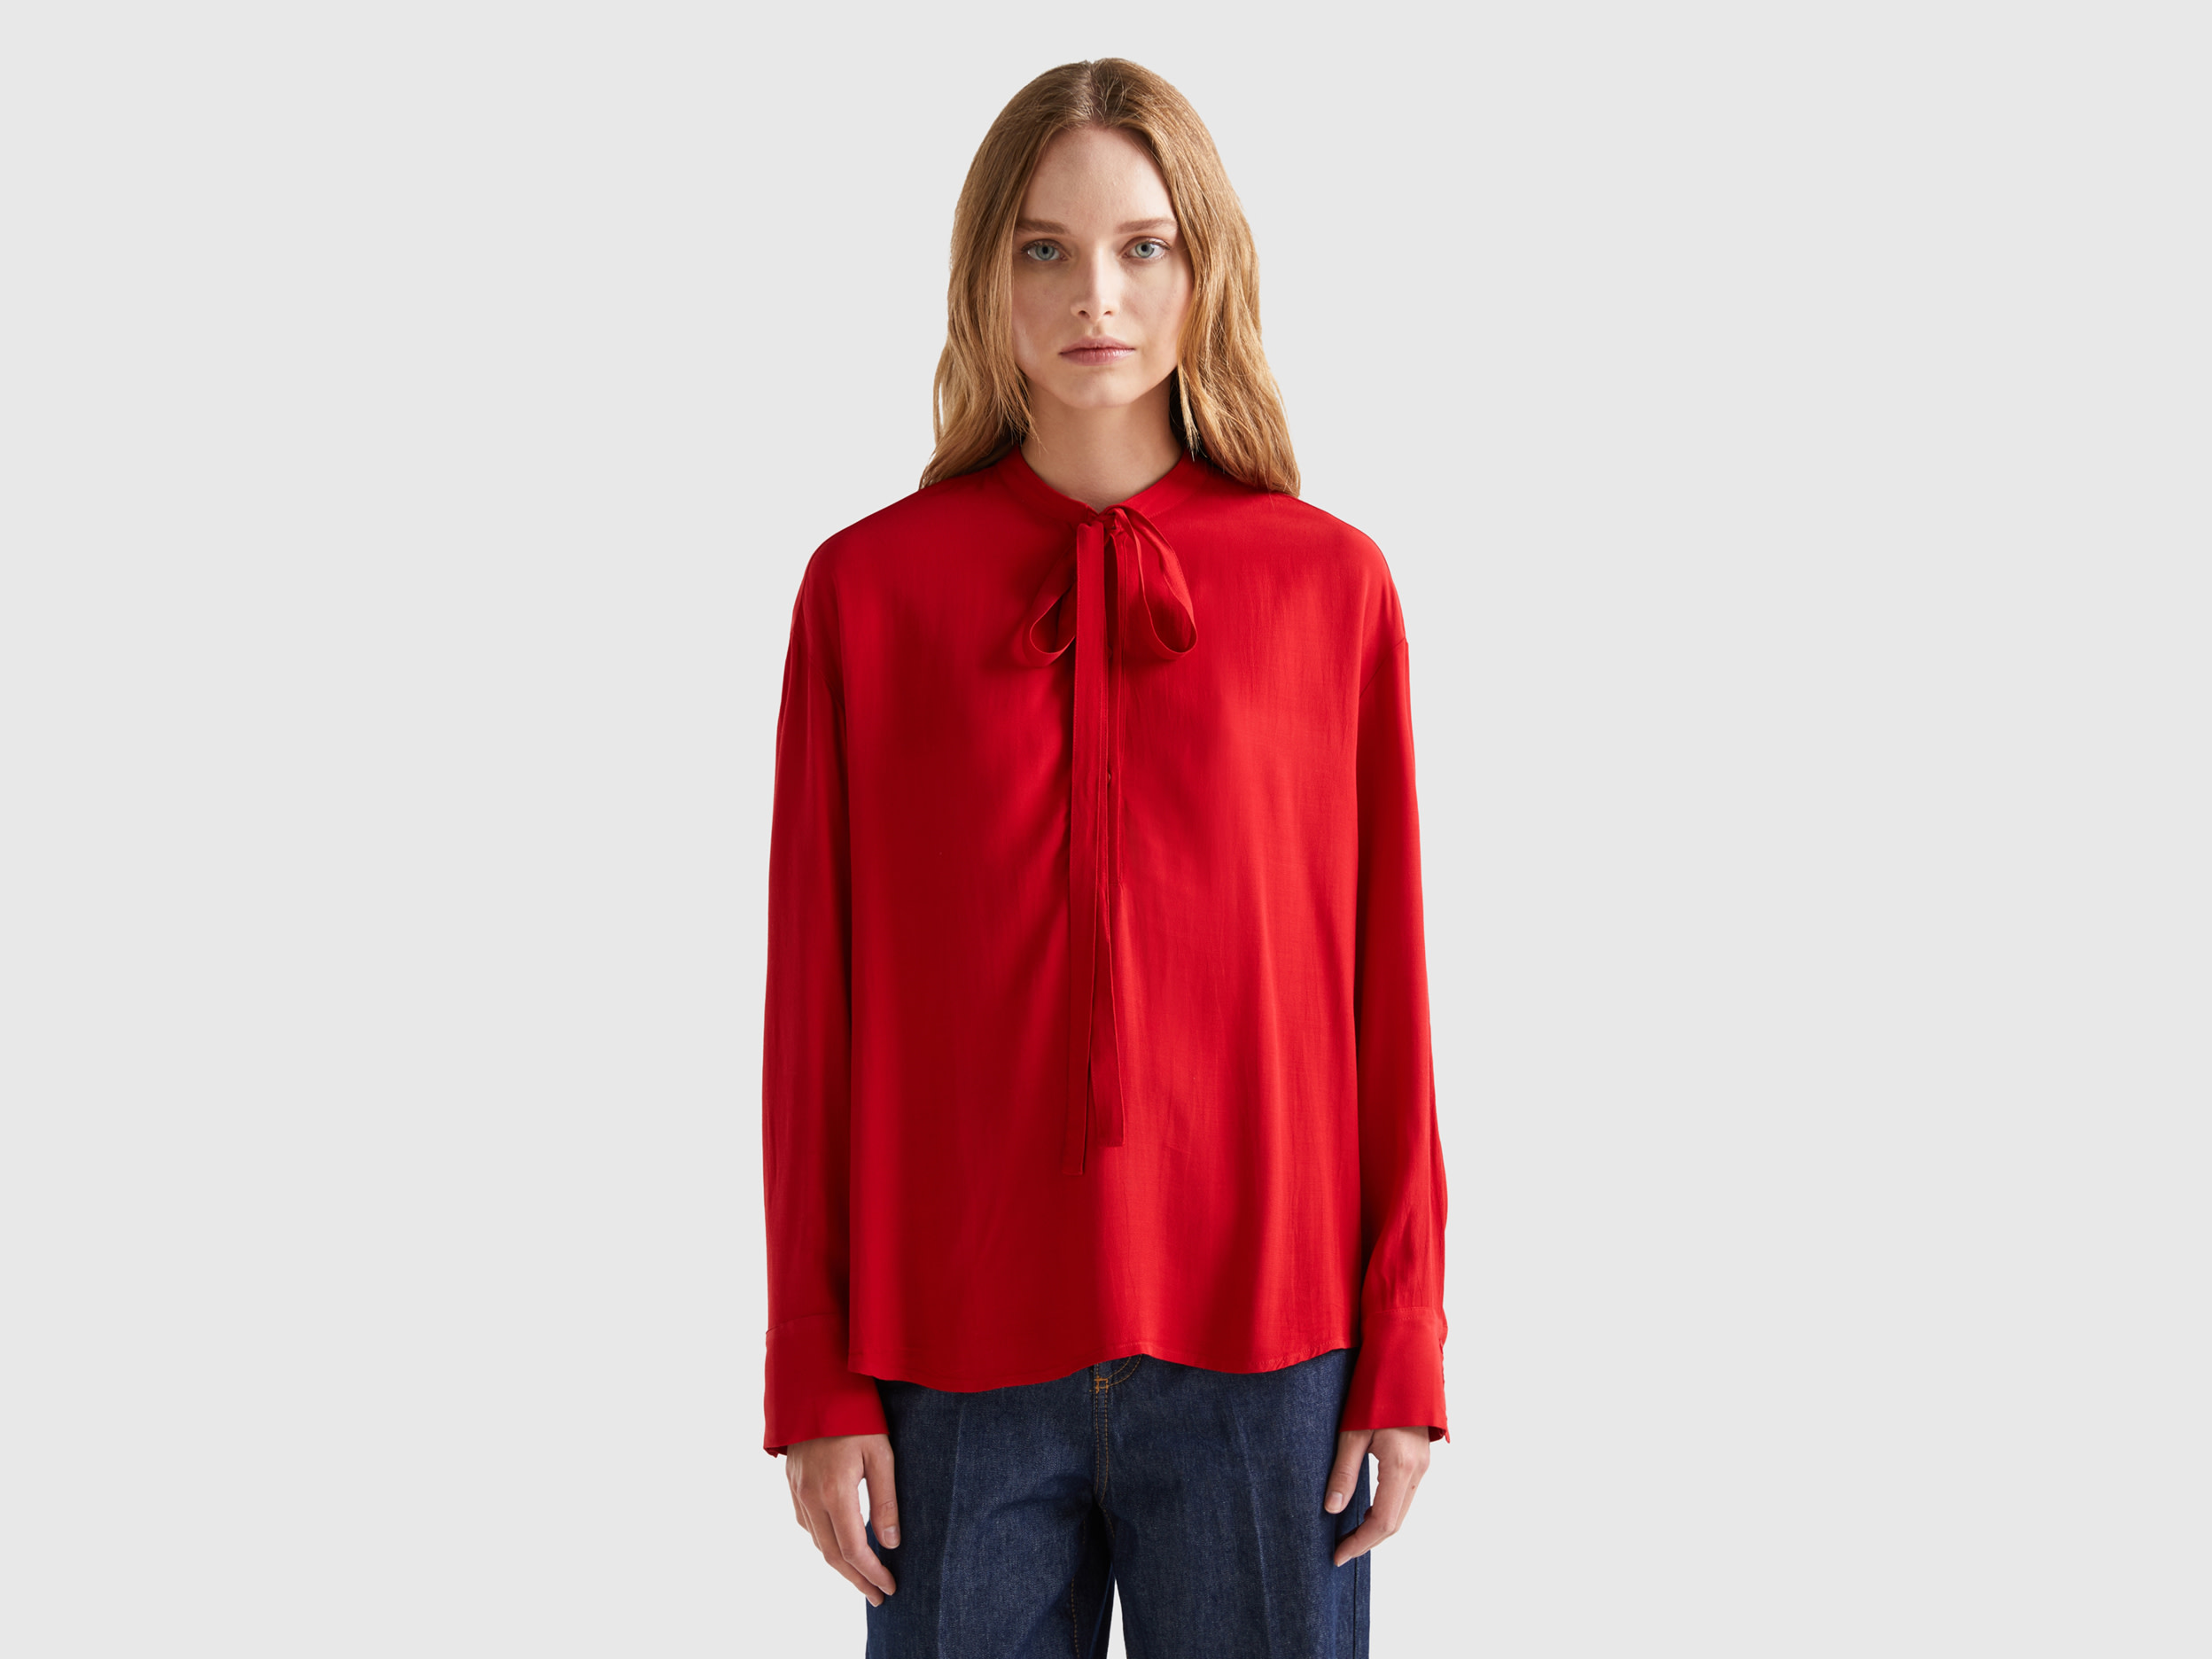 Benetton, Flowy Blouse With Laces, size L, Red, Women